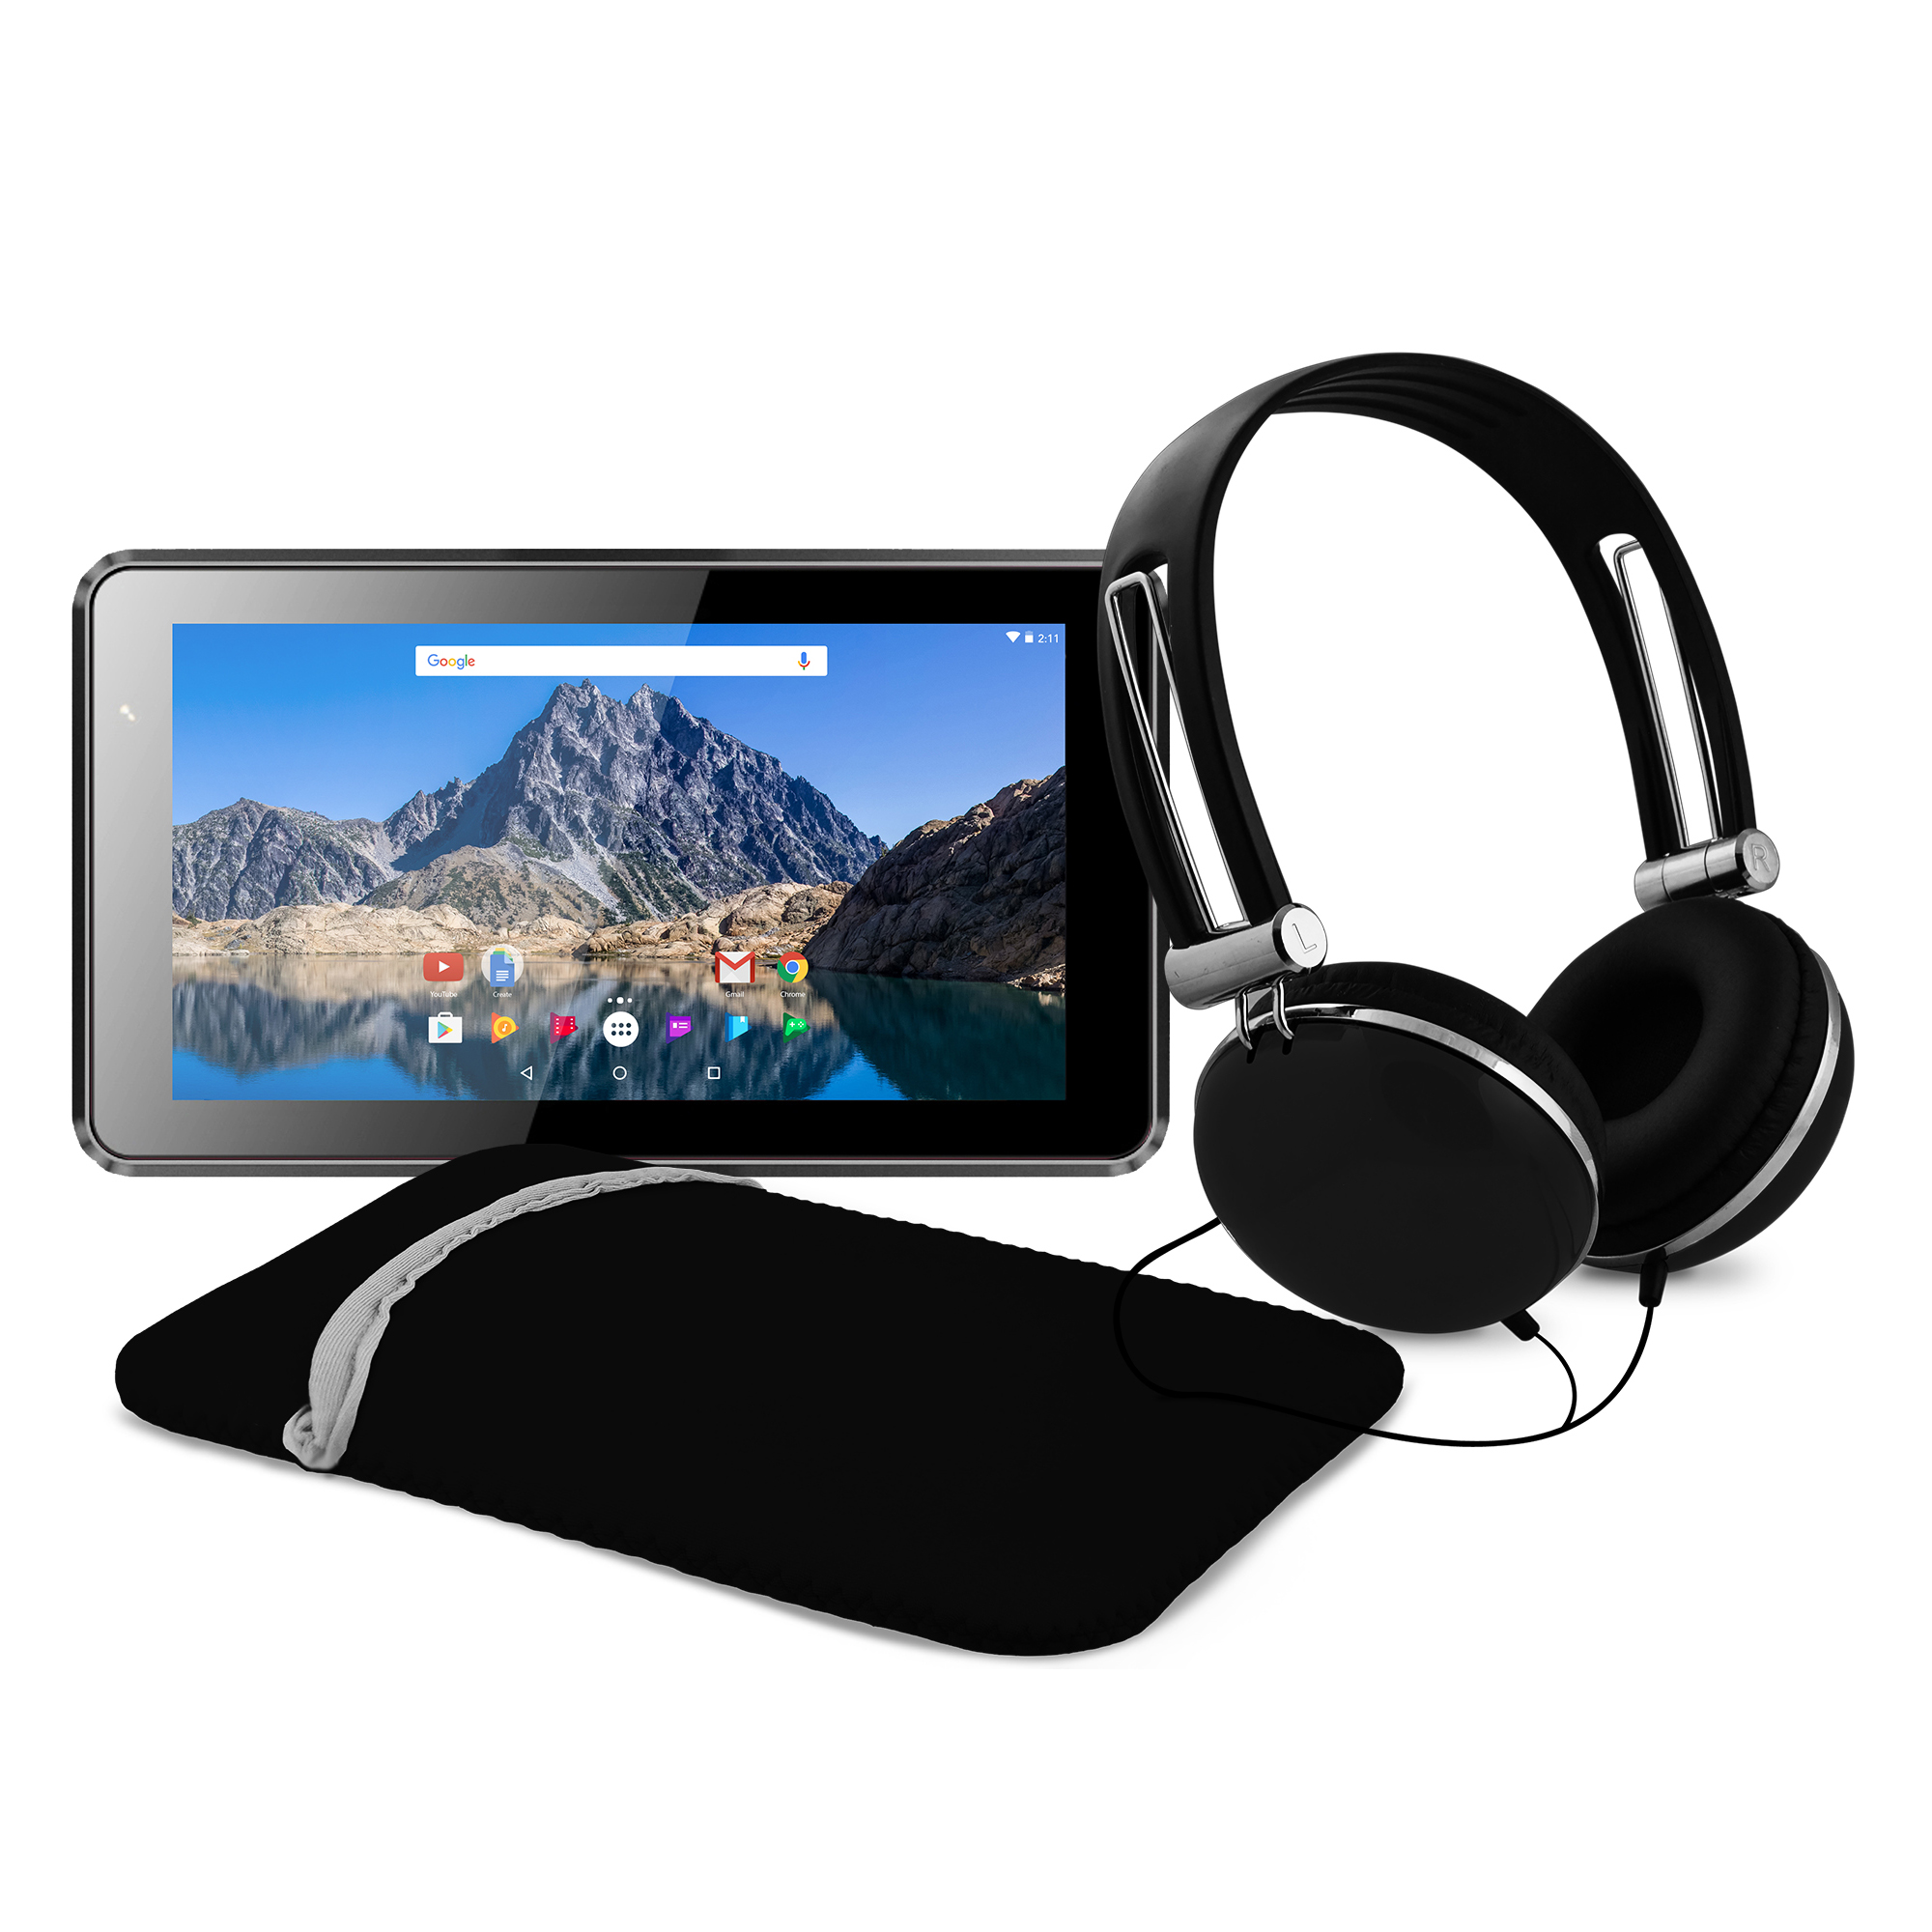 Ematic 7" 16GB Tablet with Android 7.1 (Nougat) + Sleeve and Headphones, Black (EGQ373BL) - image 1 of 20